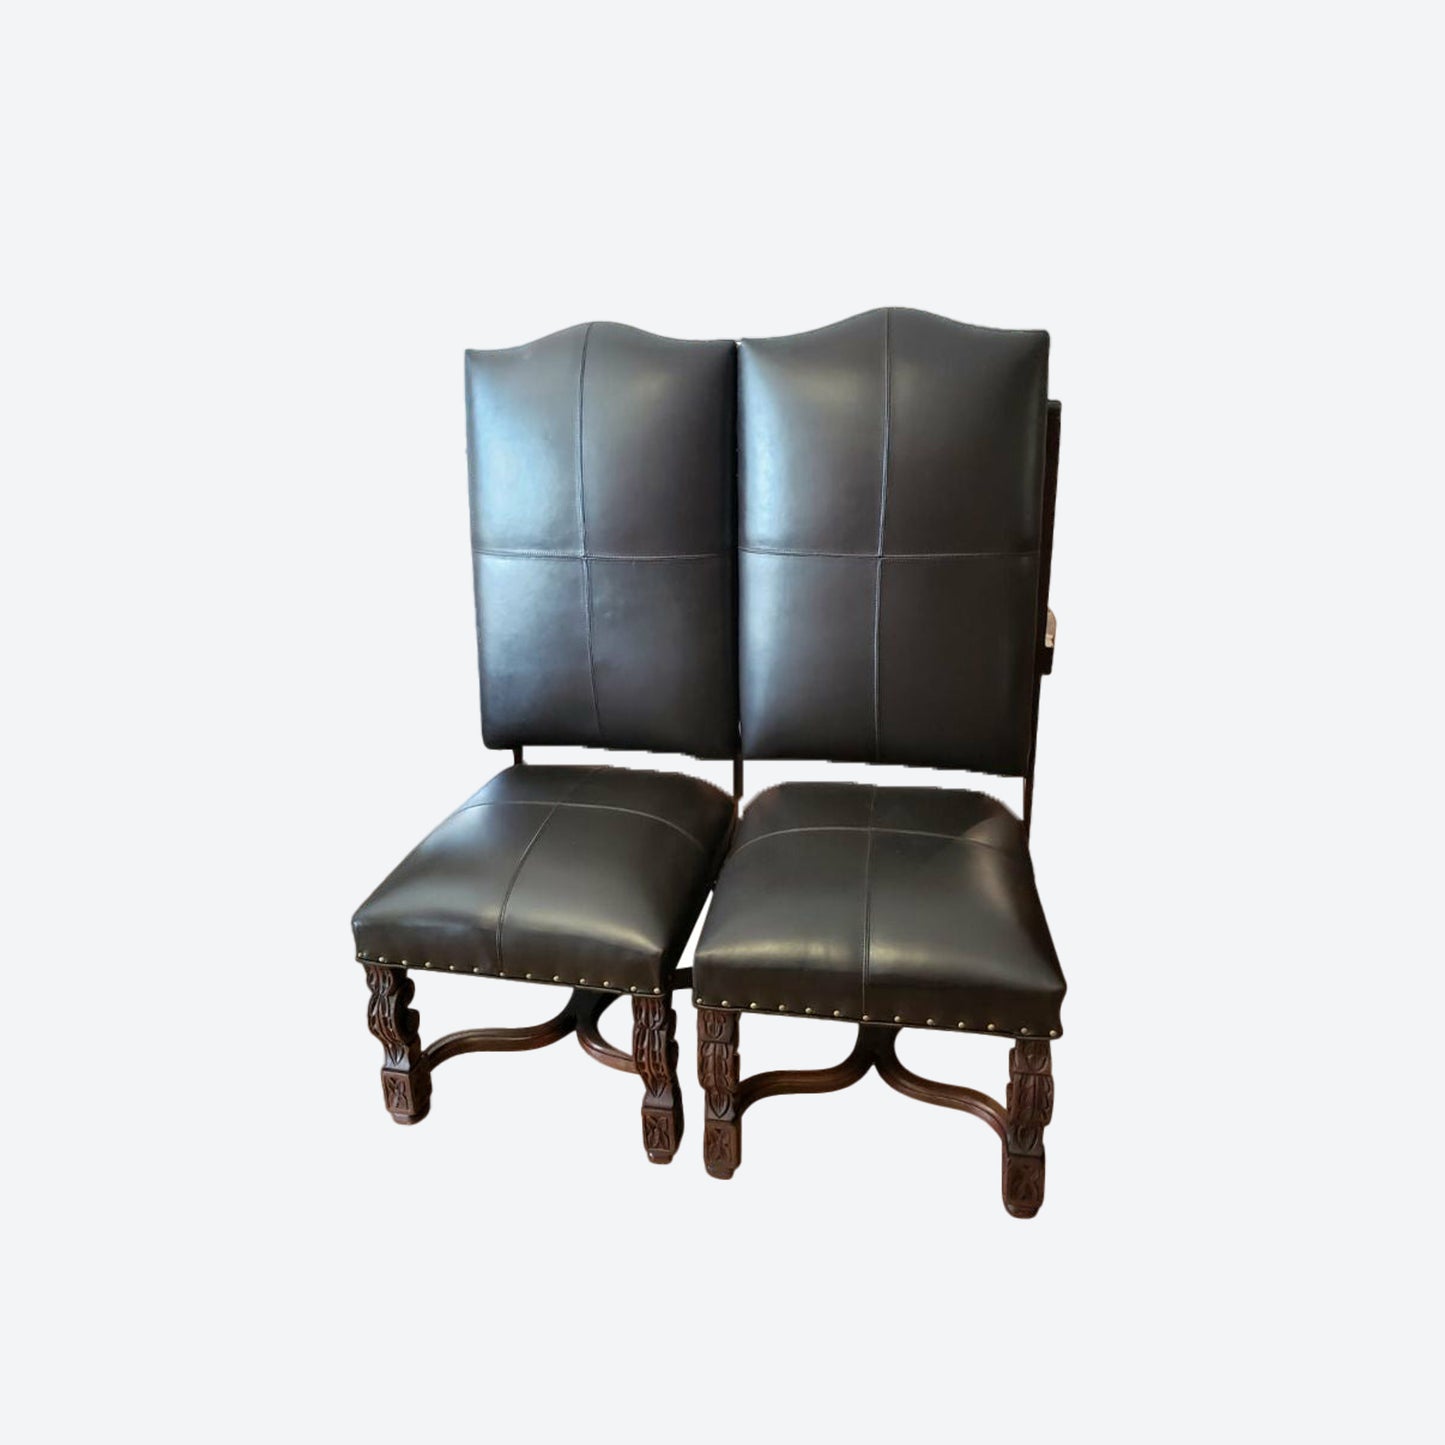 Mesquite Wood Dark Brown Leather Accent Chair -SK -SKU 1048